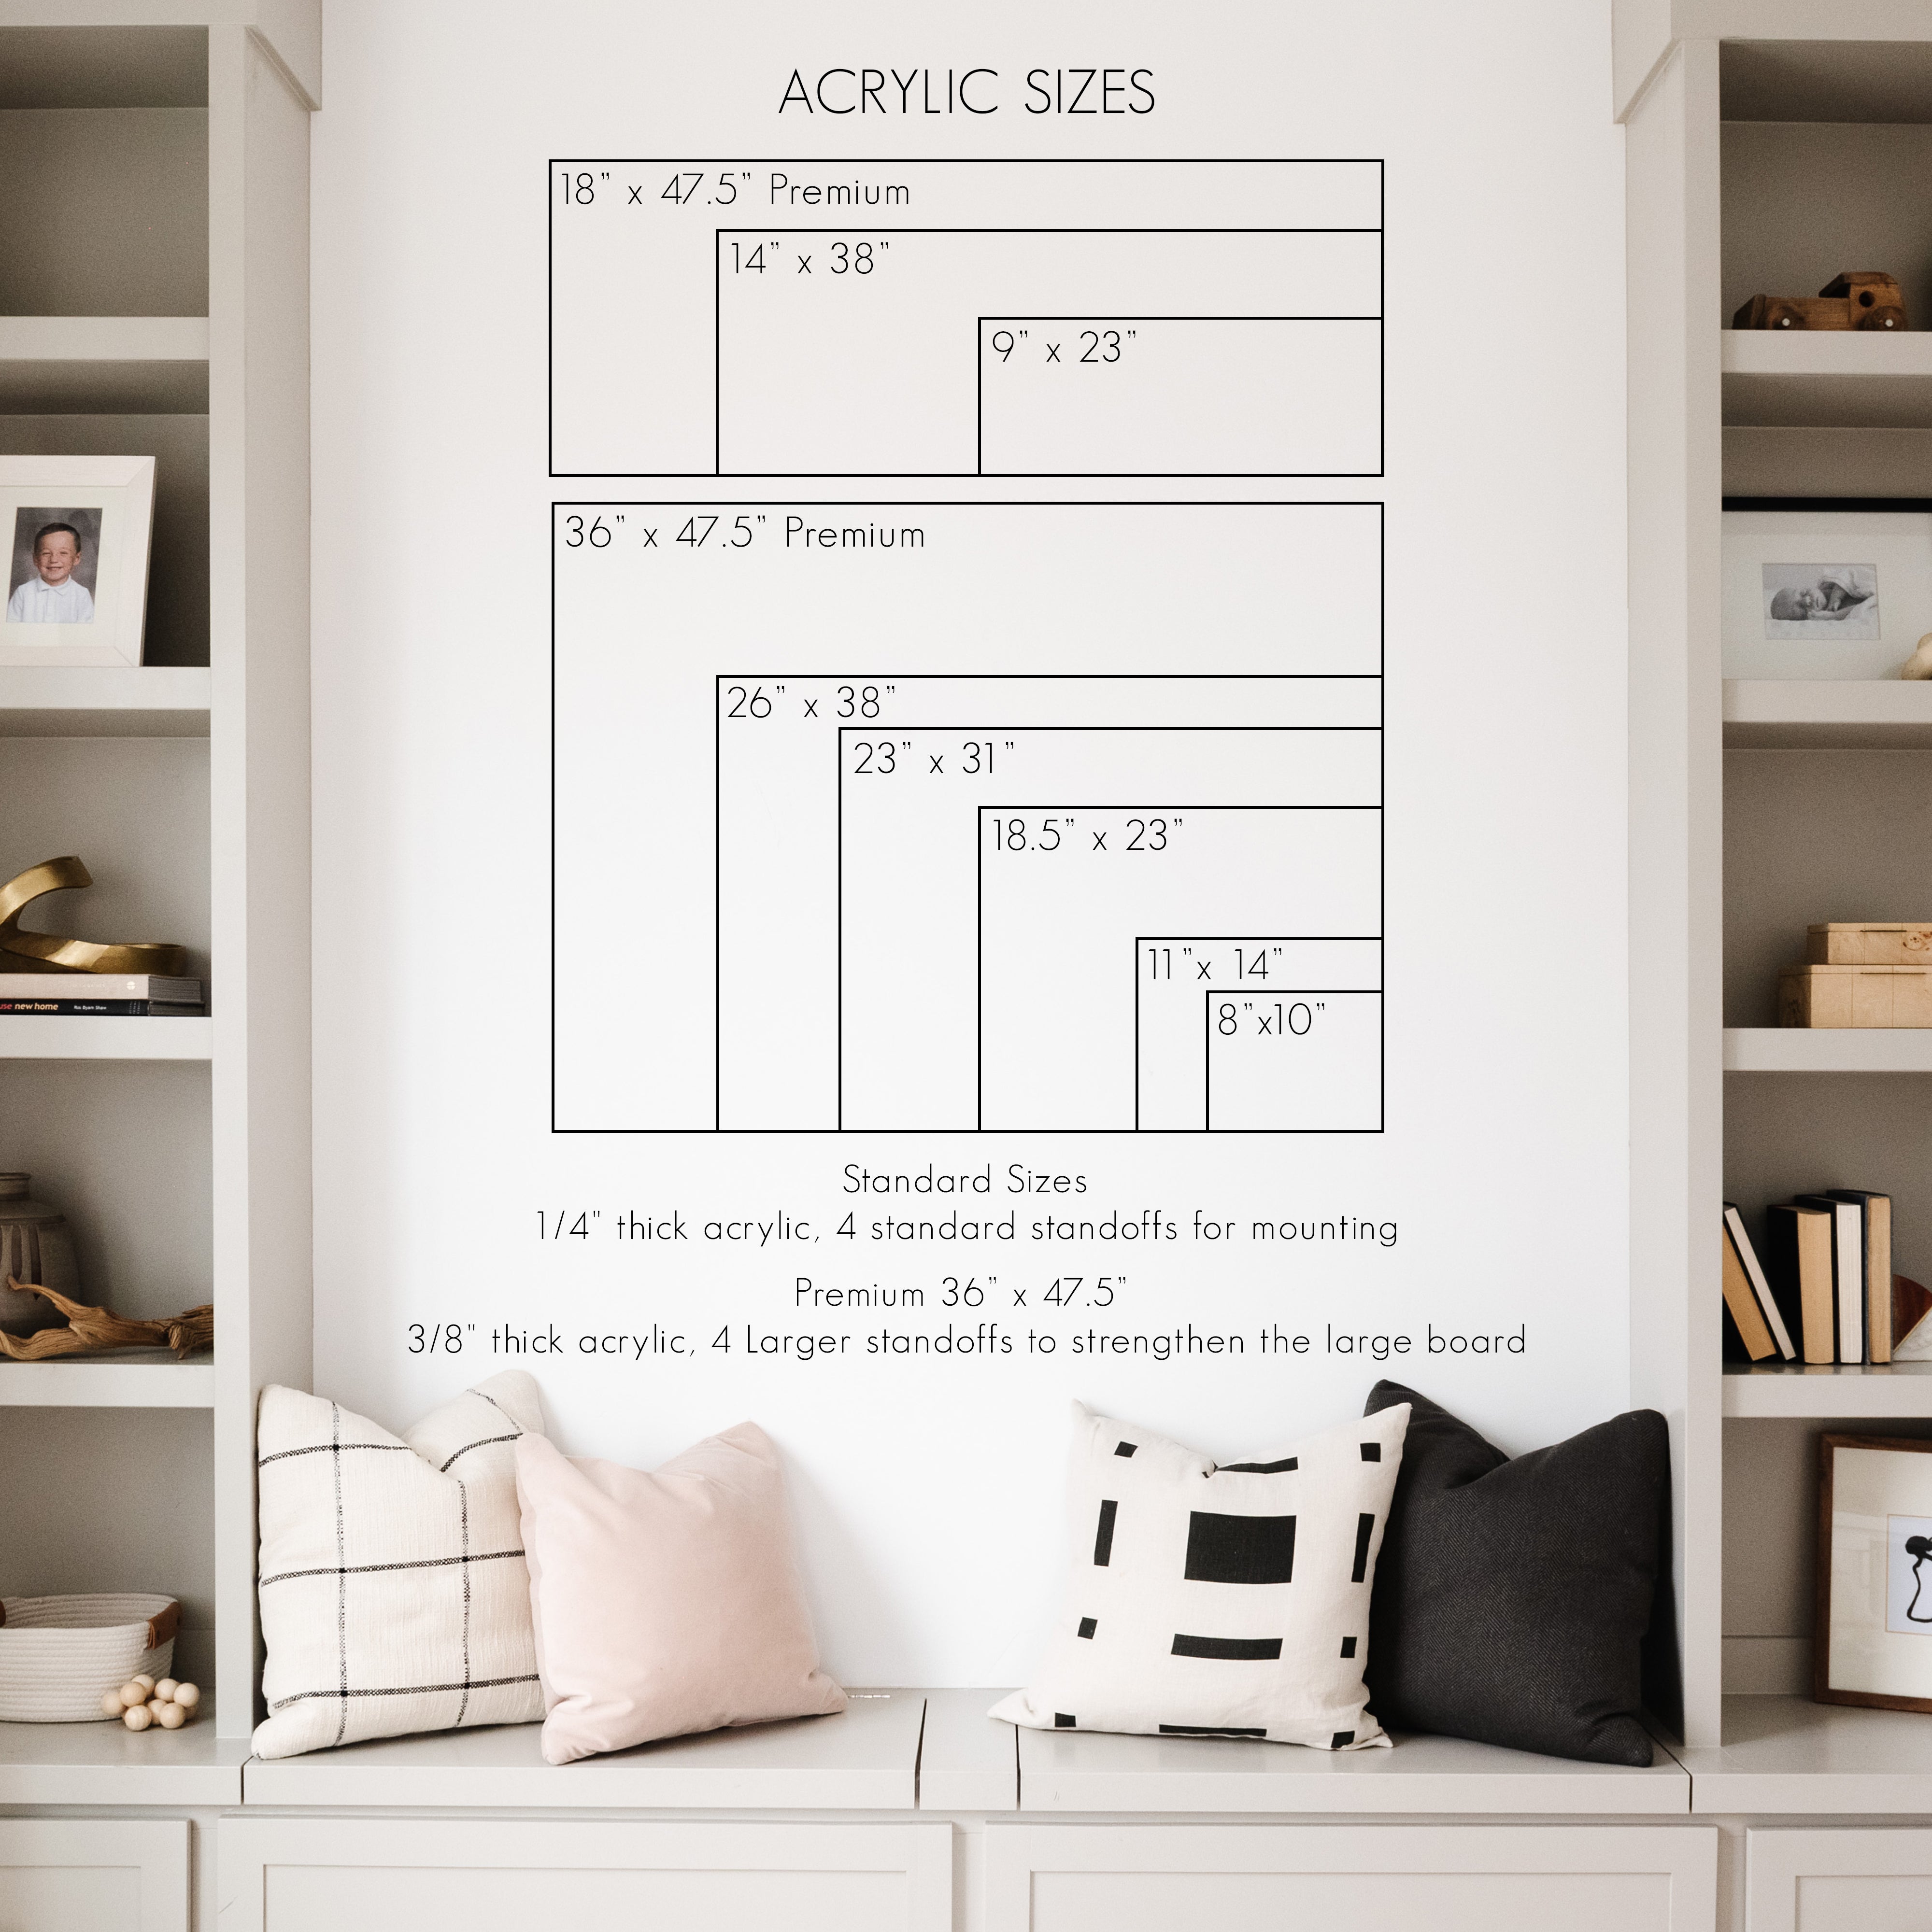 Week & Month Frosted Acrylic Calendar + 6 Sections | Horizontal Madi